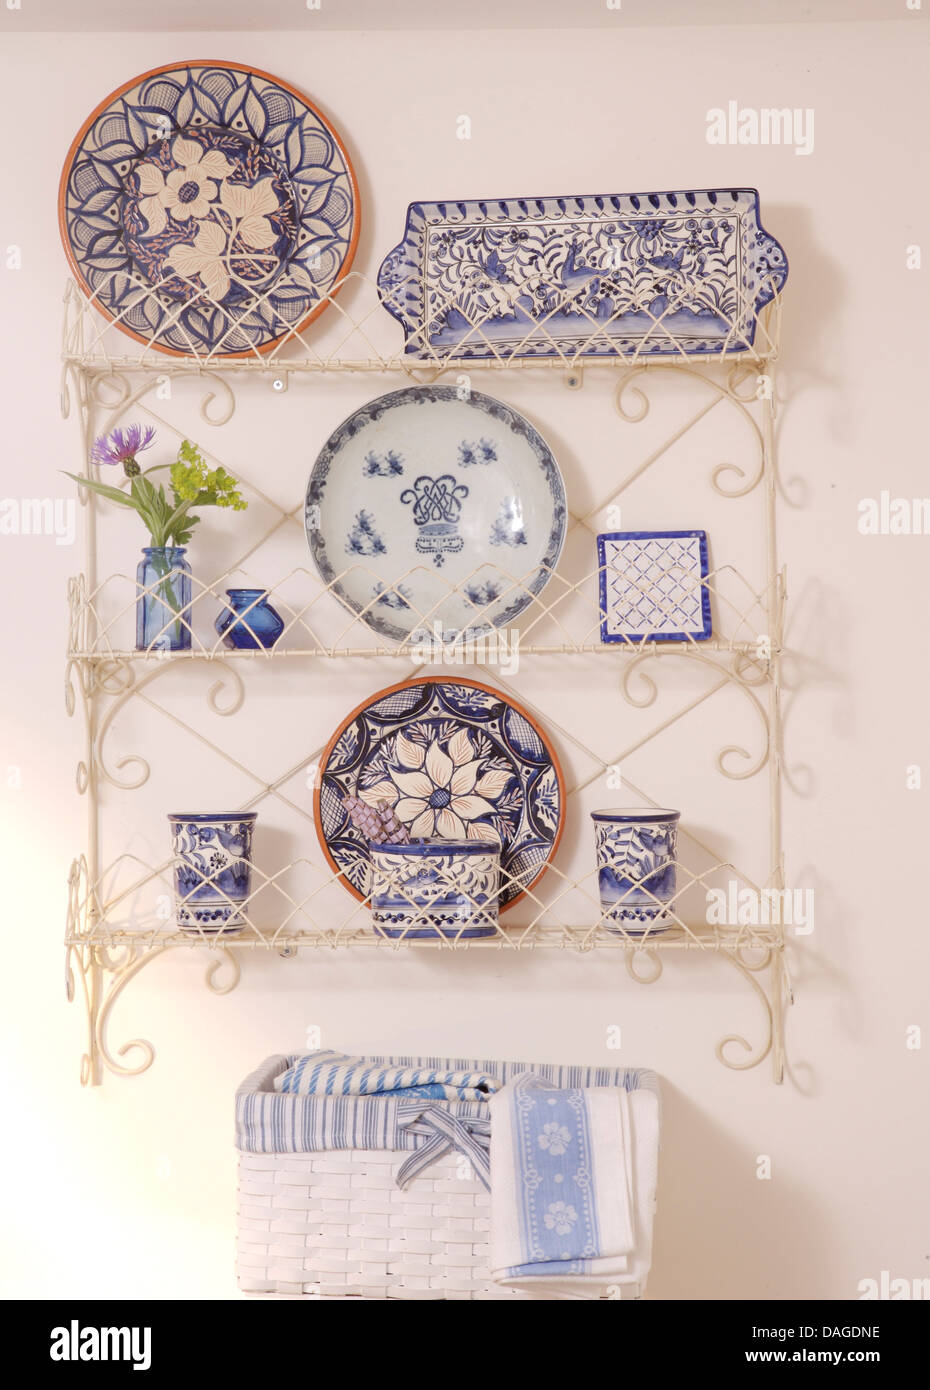 Collection of blue+white plates and china displayed in white wire work shelf unit Stock Photo